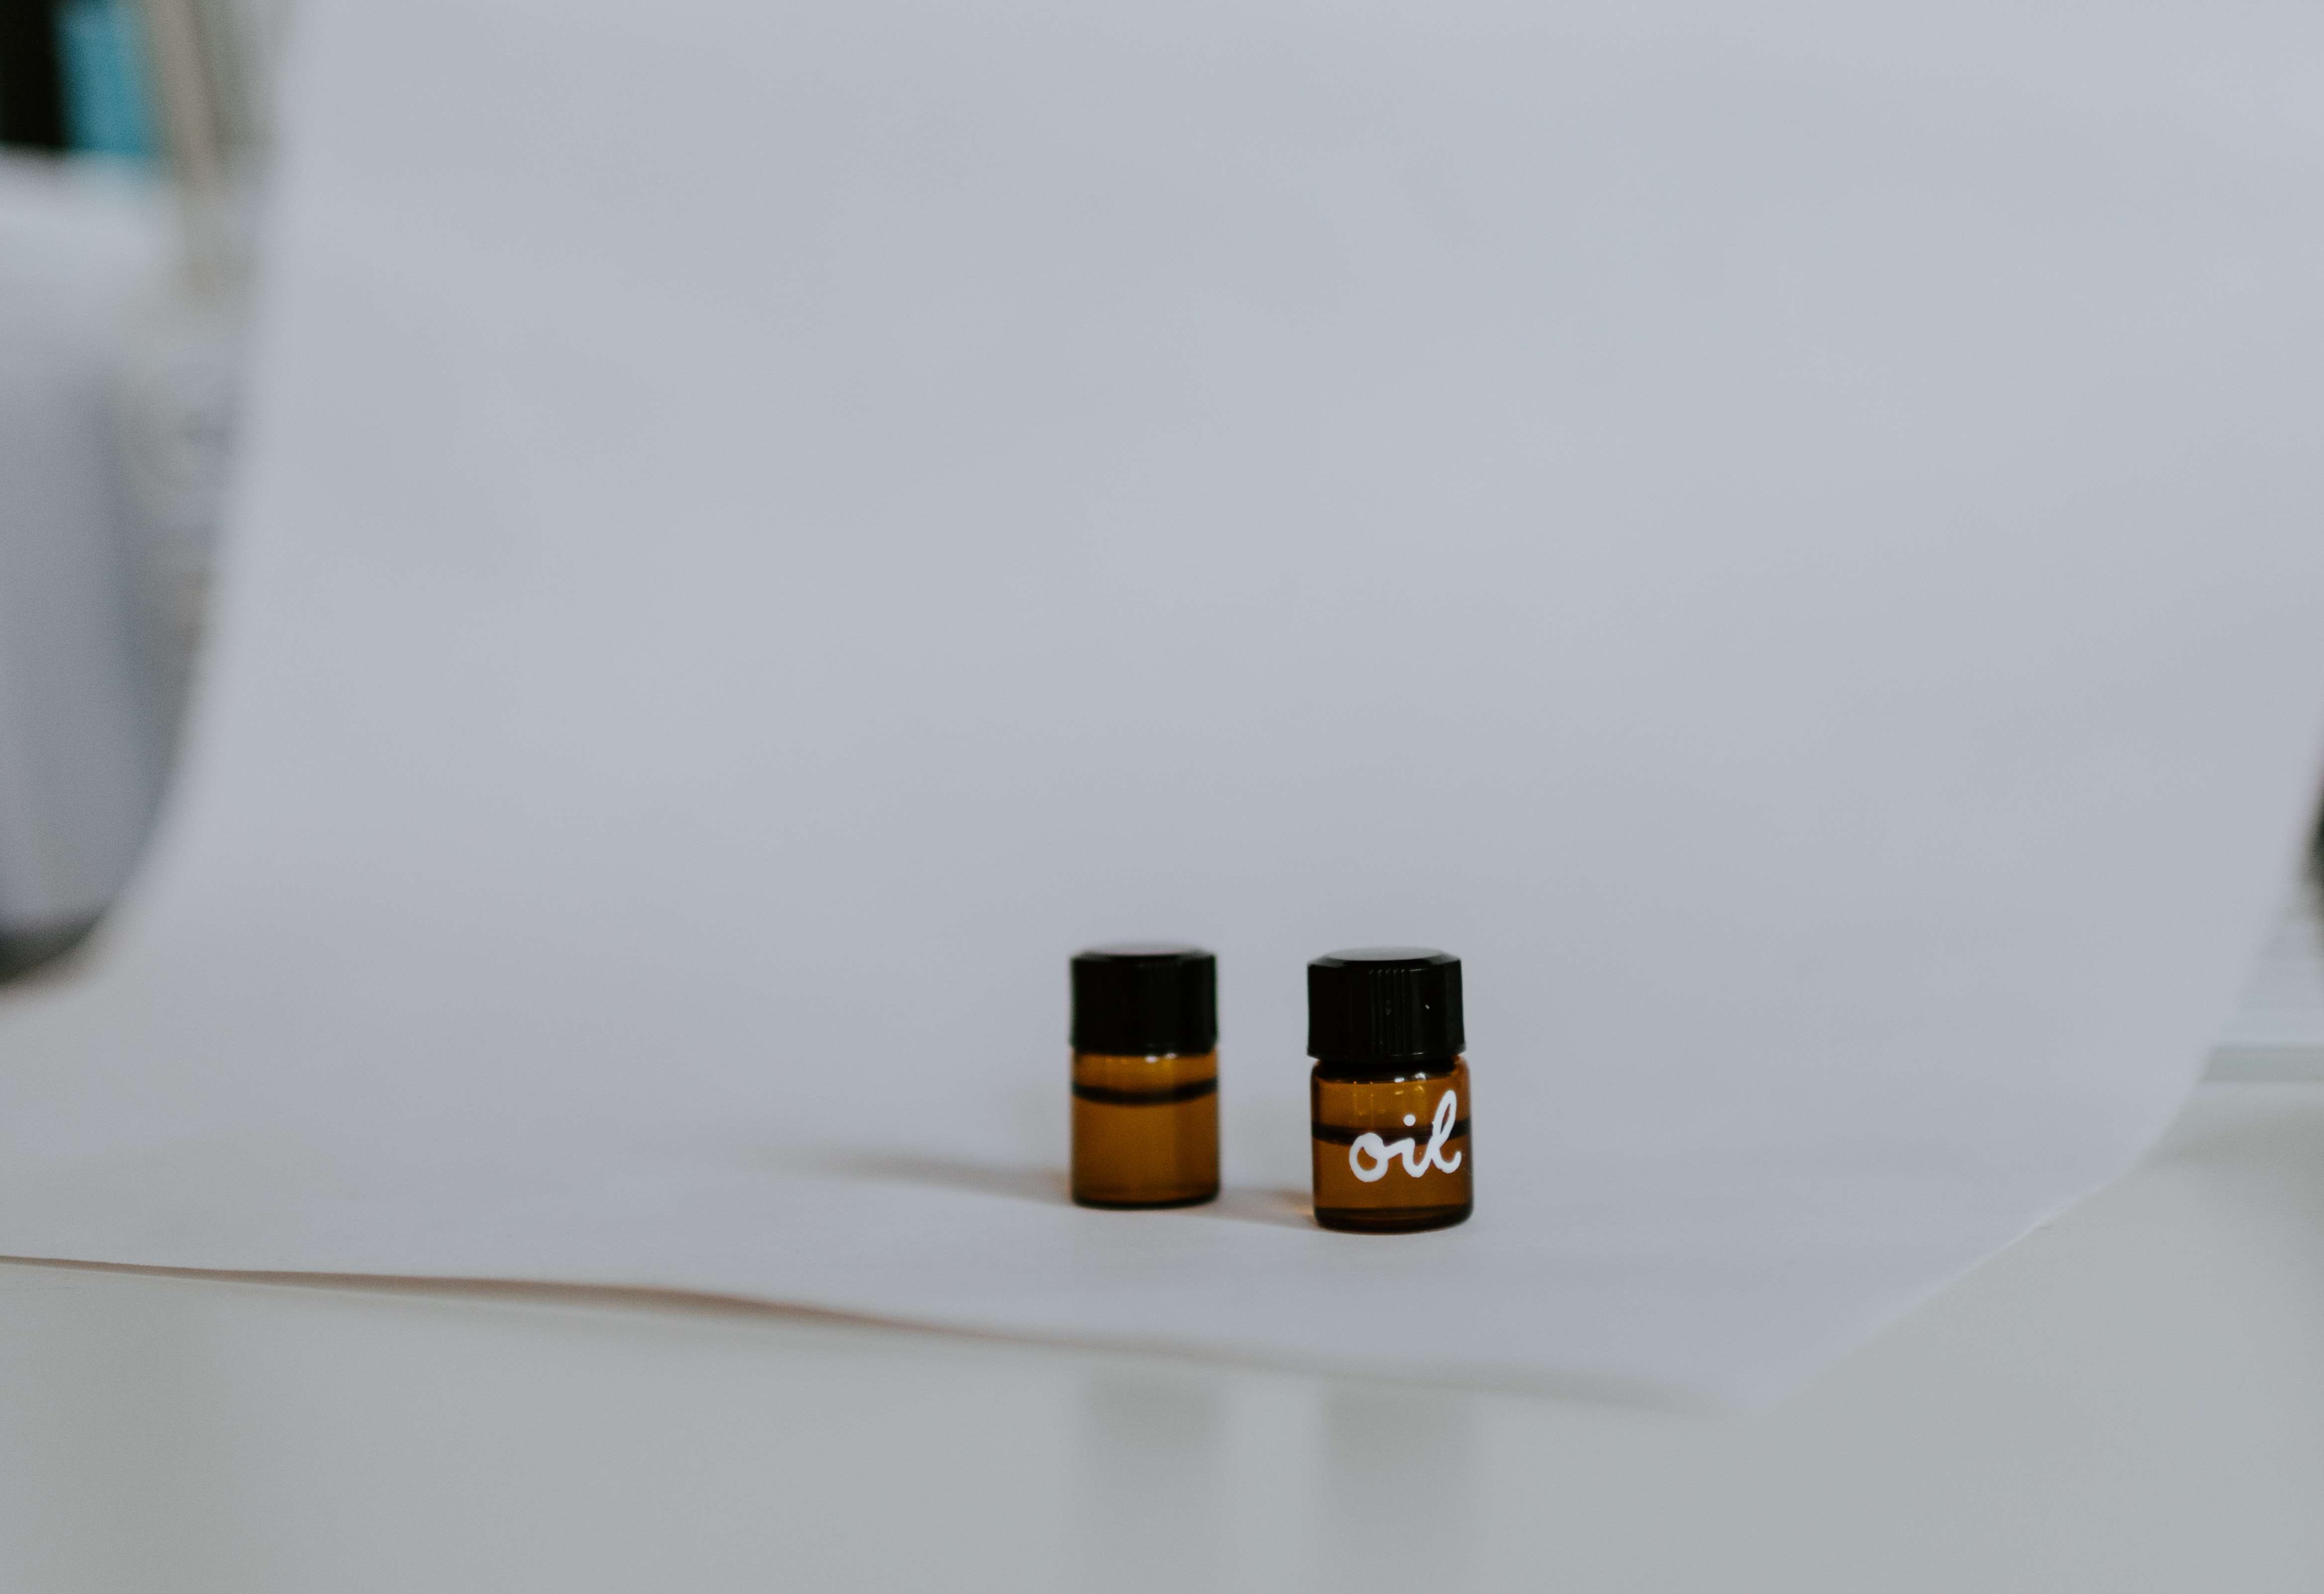 Two small vials of oil. Photo by Kelly Sikkema on Unsplash